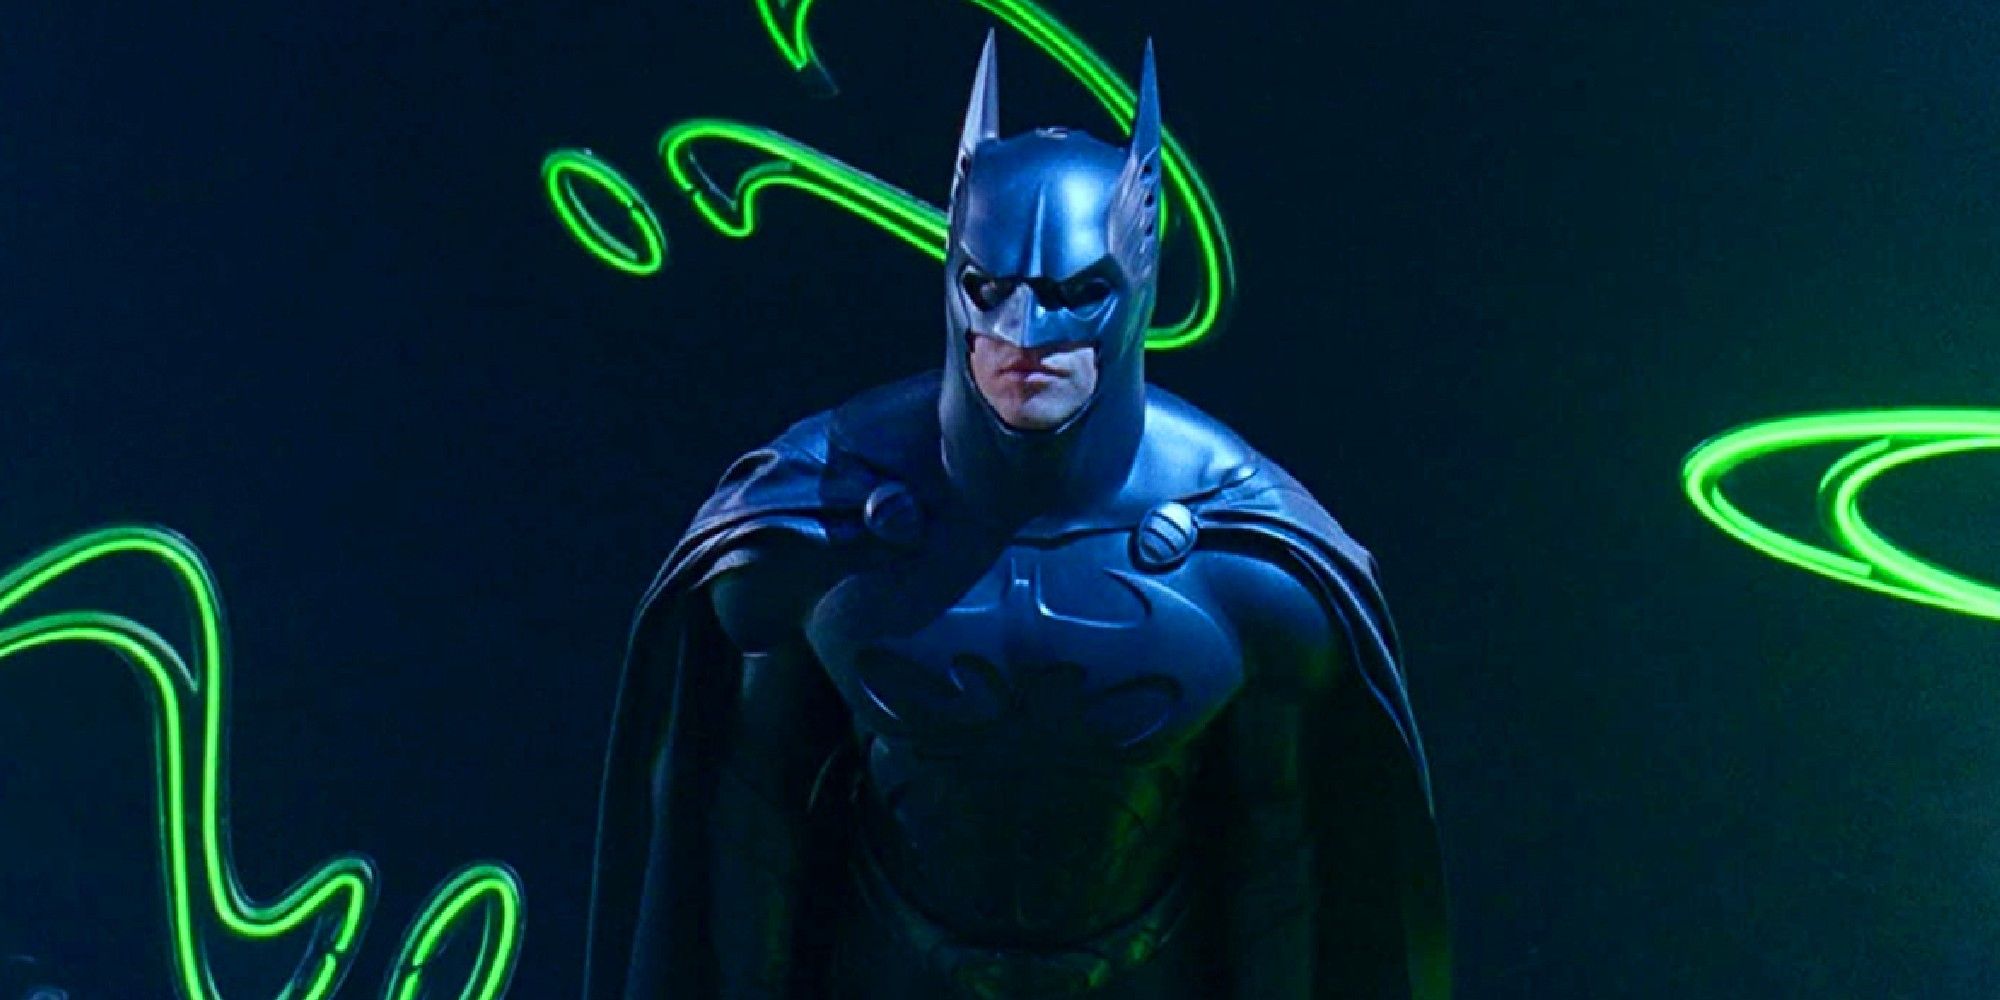 Val Kilmer as Batman surrounded by question marks in Batman Forever